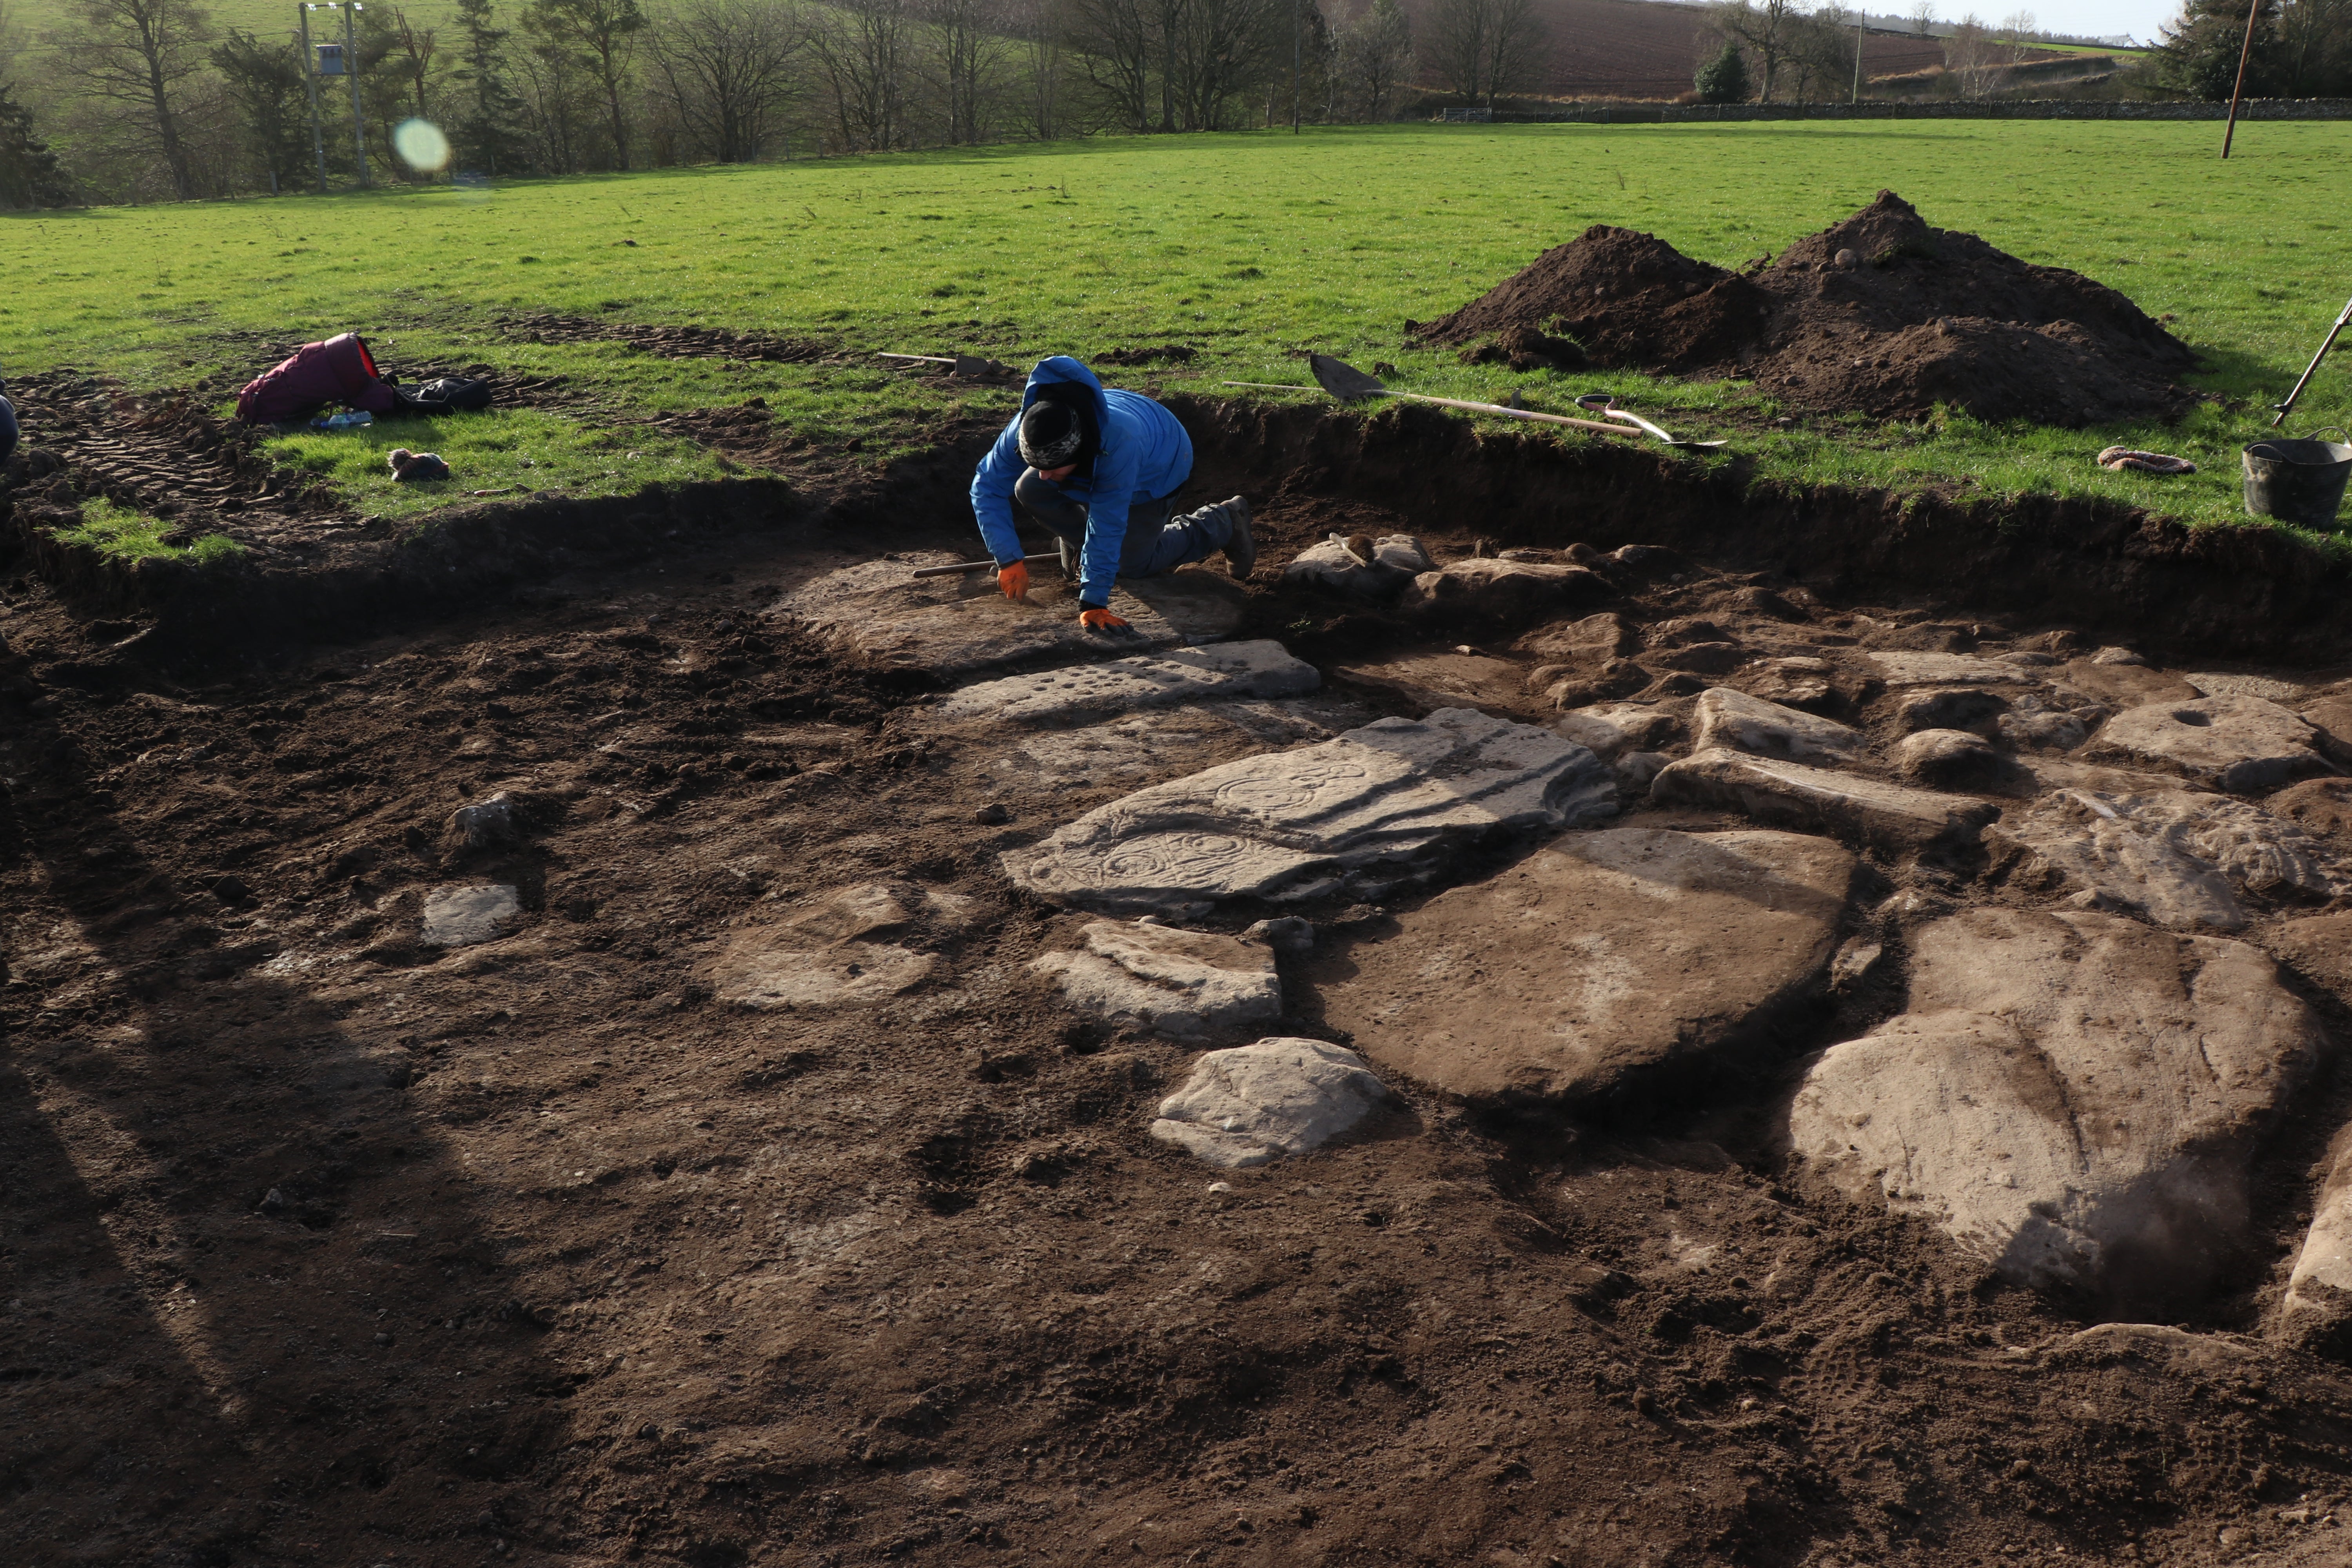 A rare Pictish symbol stone was found near the site of the Battle of Nechtansmere (University of Aberdeen)